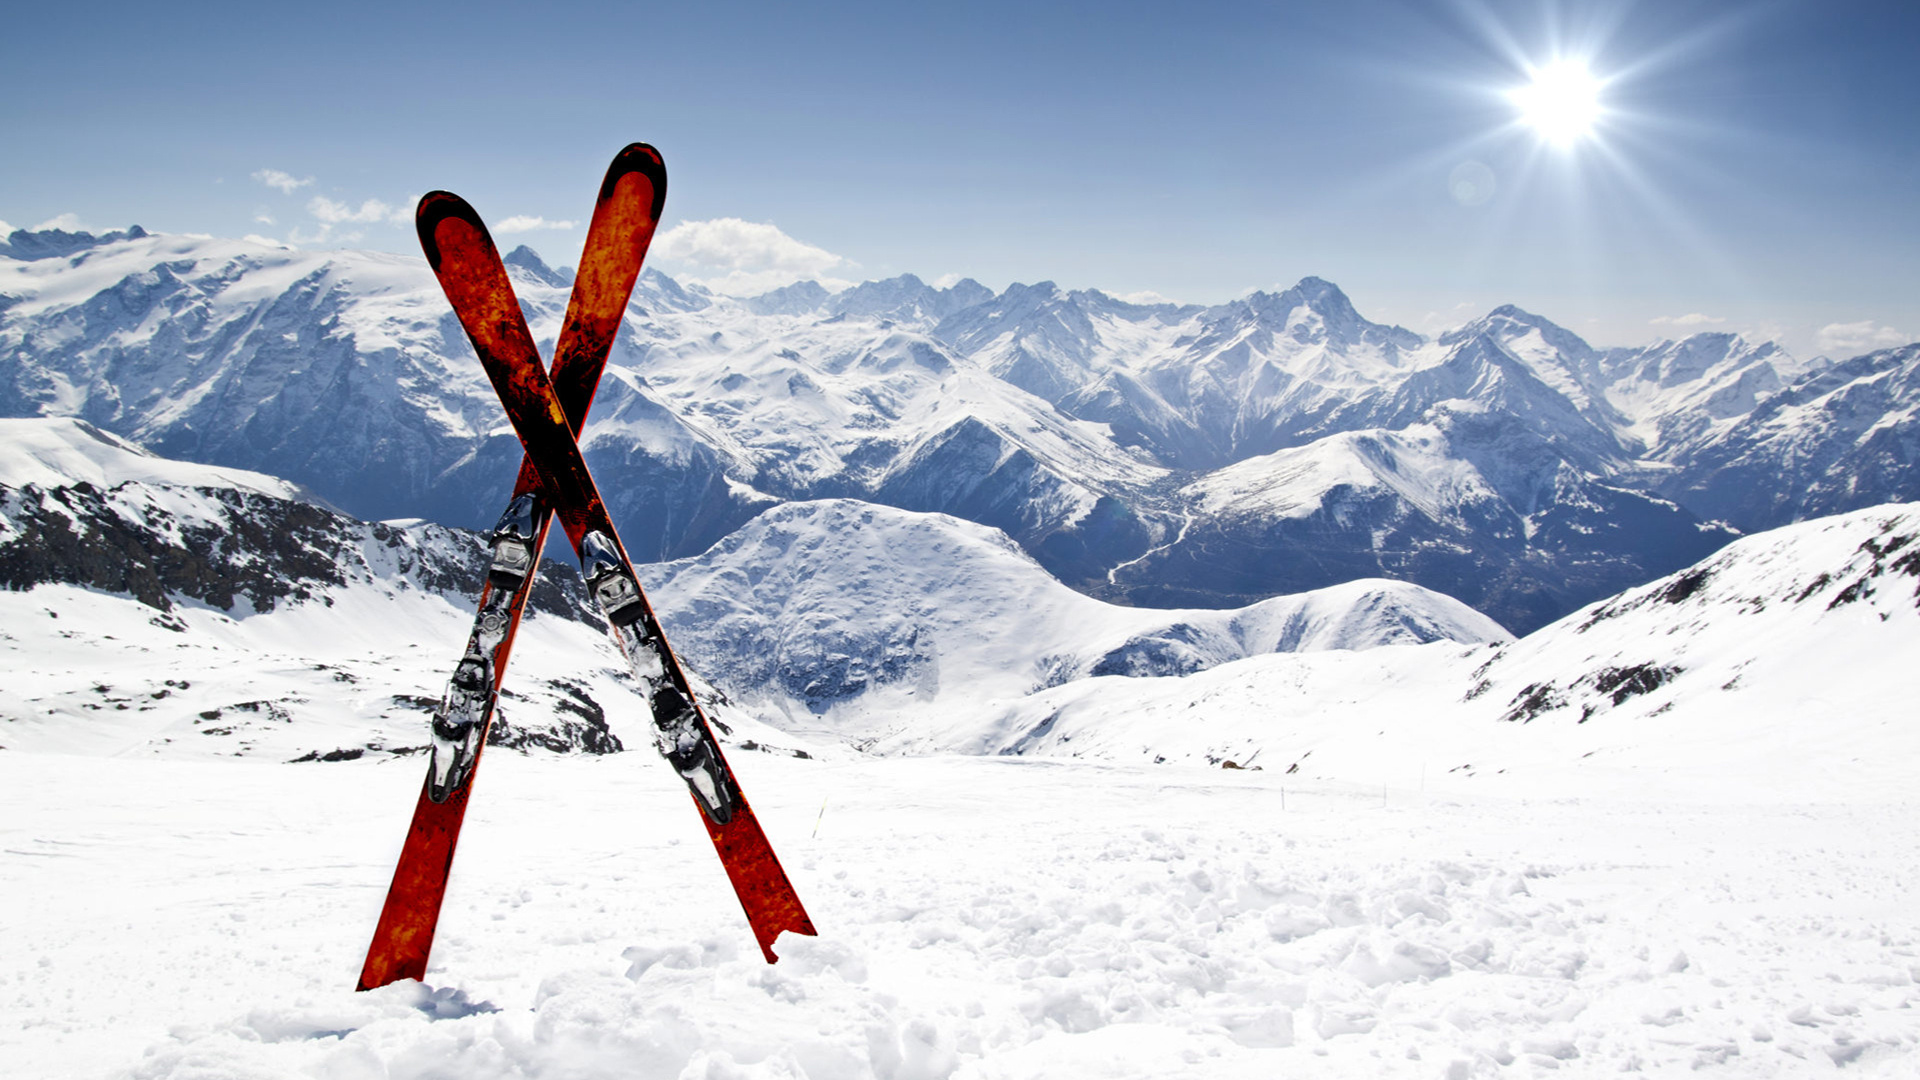 Skiing: Mountains, Downhill in a zigzag over a snow-covered track, Winter activity. 1920x1080 Full HD Background.